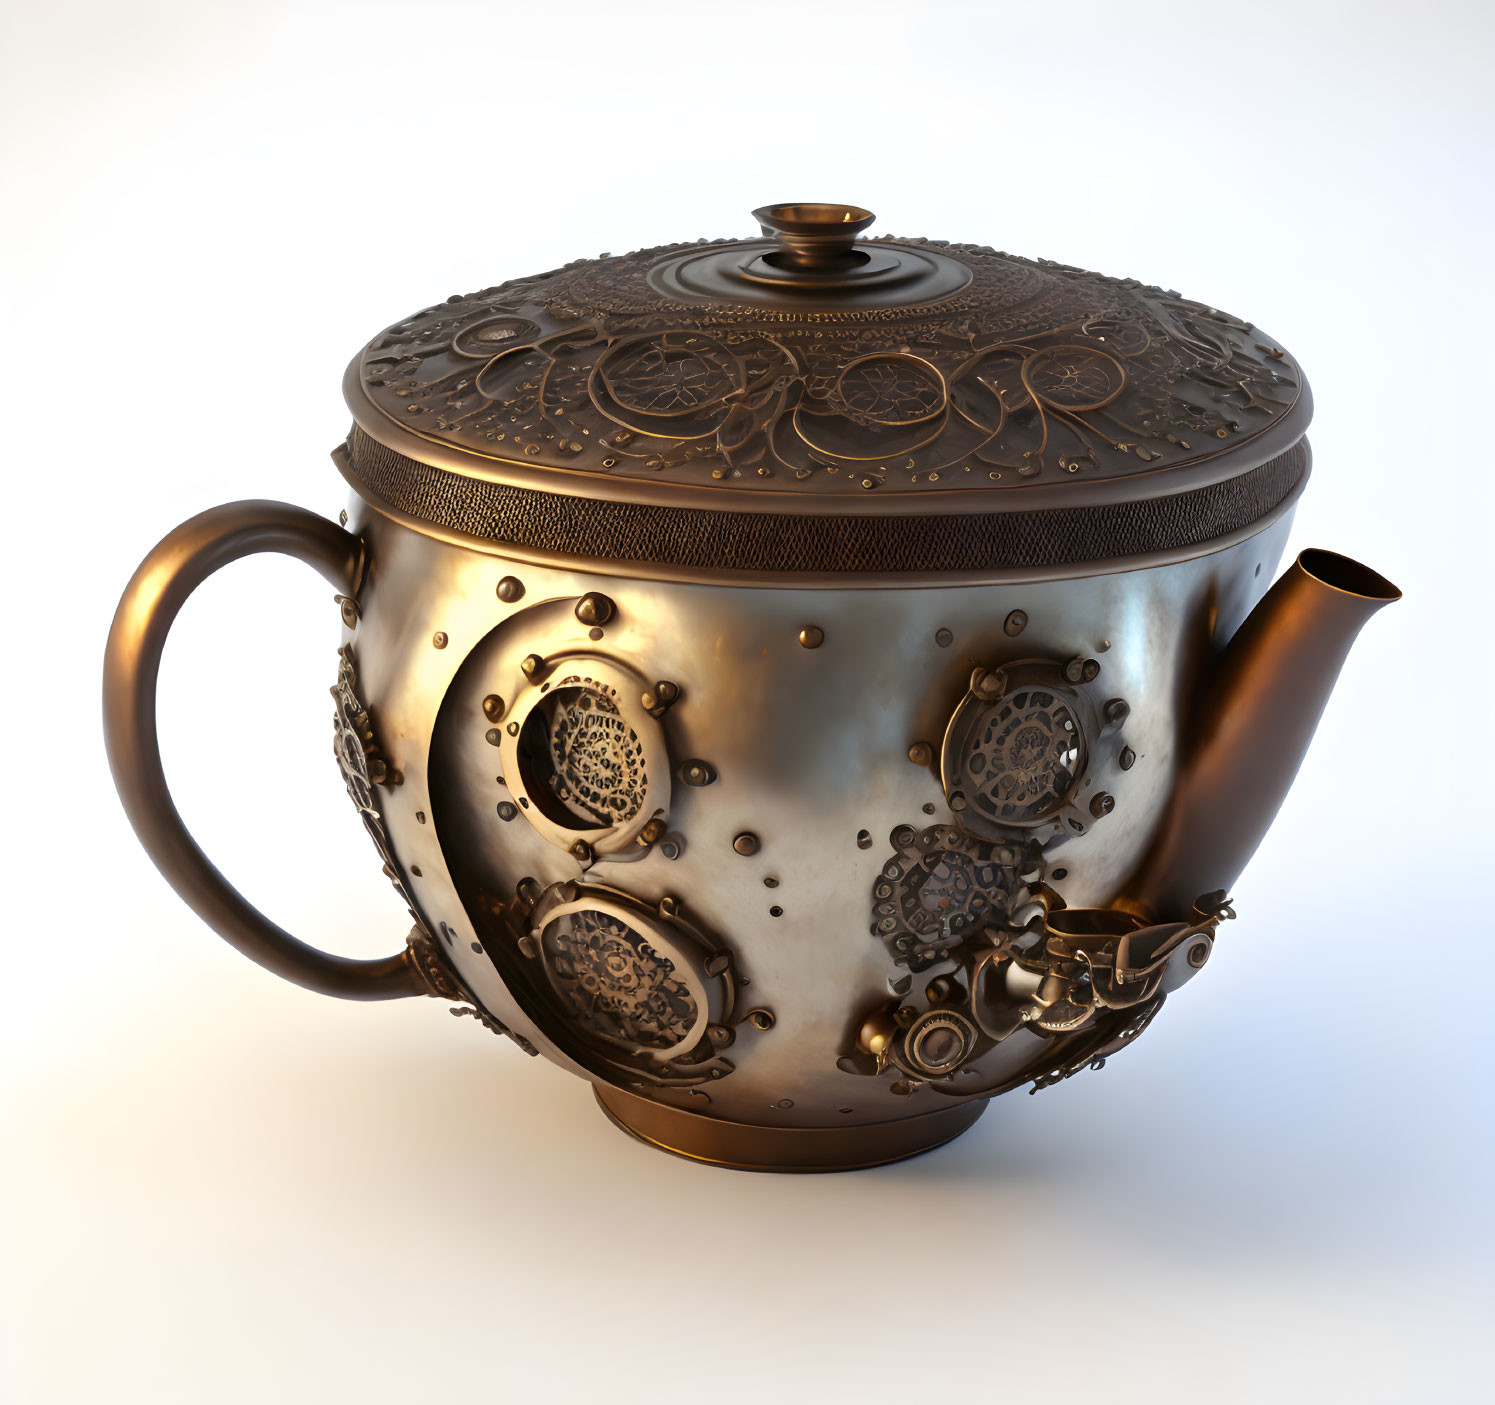 Vintage Teapot with Intricate Patterns and Metallic Finish on Neutral Background